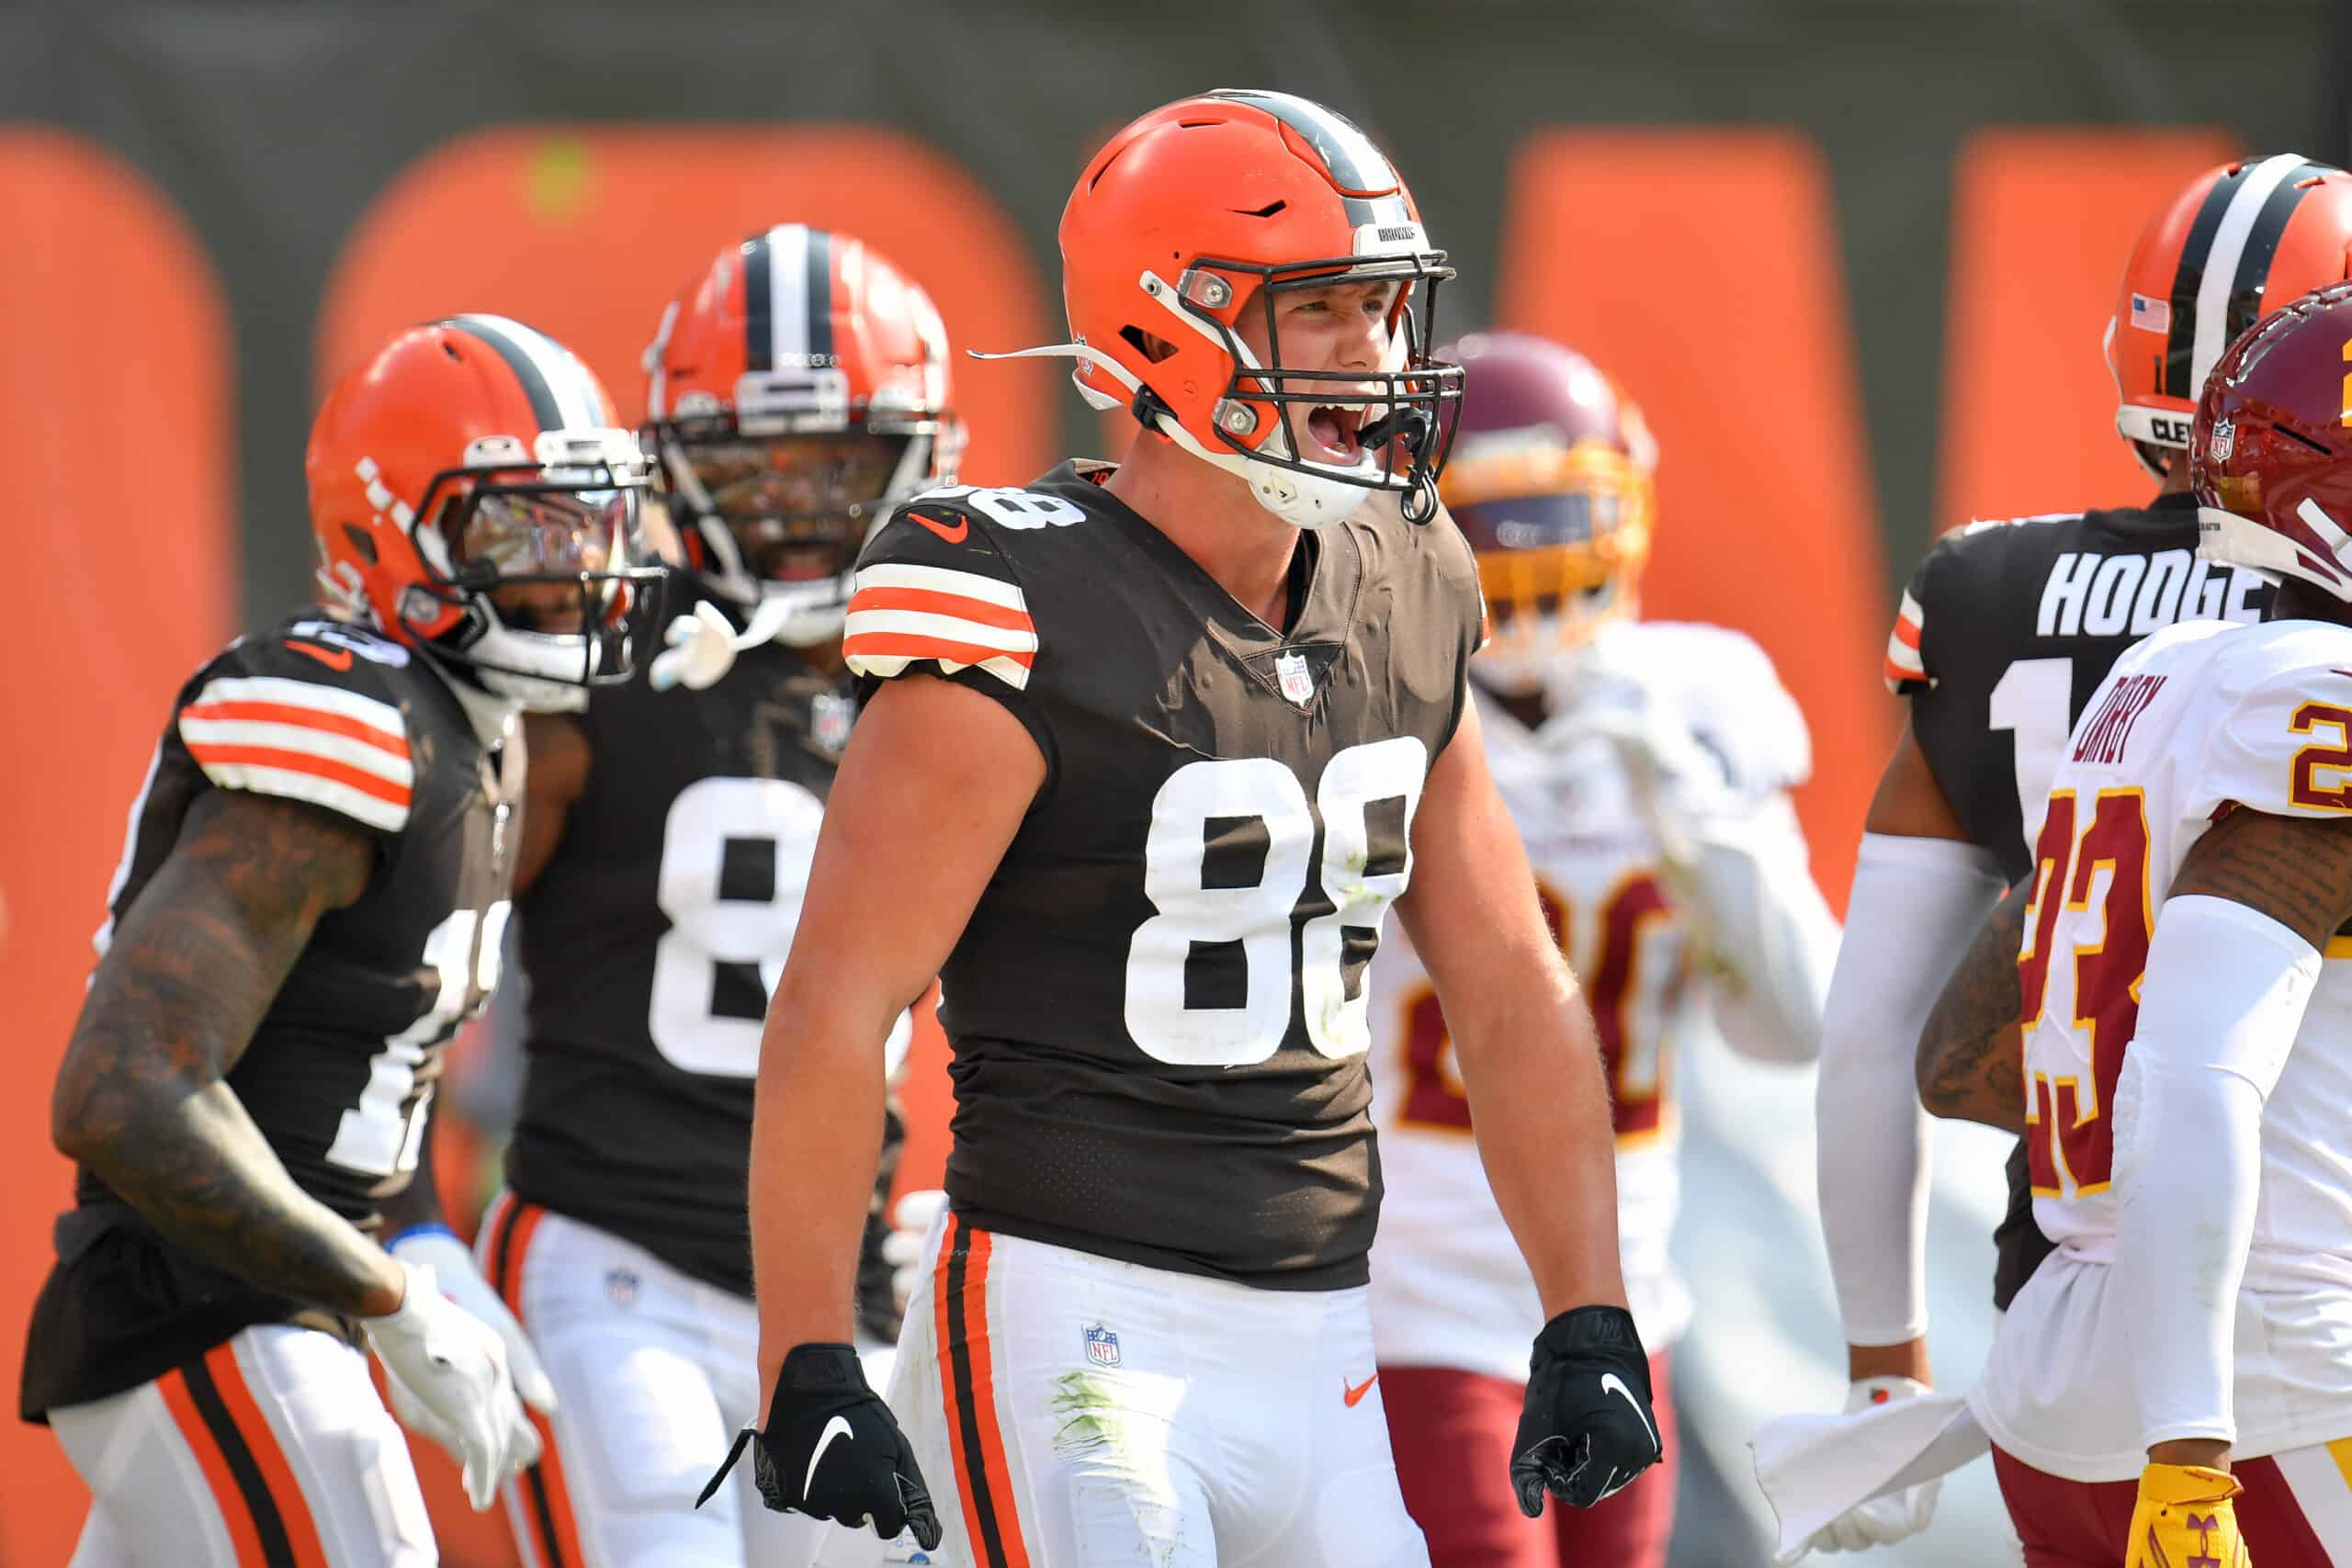 Tight end Harrison Bryant #88 of the Cleveland Browns celebrates after catching a touchdown pass during the fourth quarter against the Washington Football Team at FirstEnergy Stadium on September 27, 2020 in Cleveland, Ohio. The Browns defeated the Washington Football Team 34-20. 